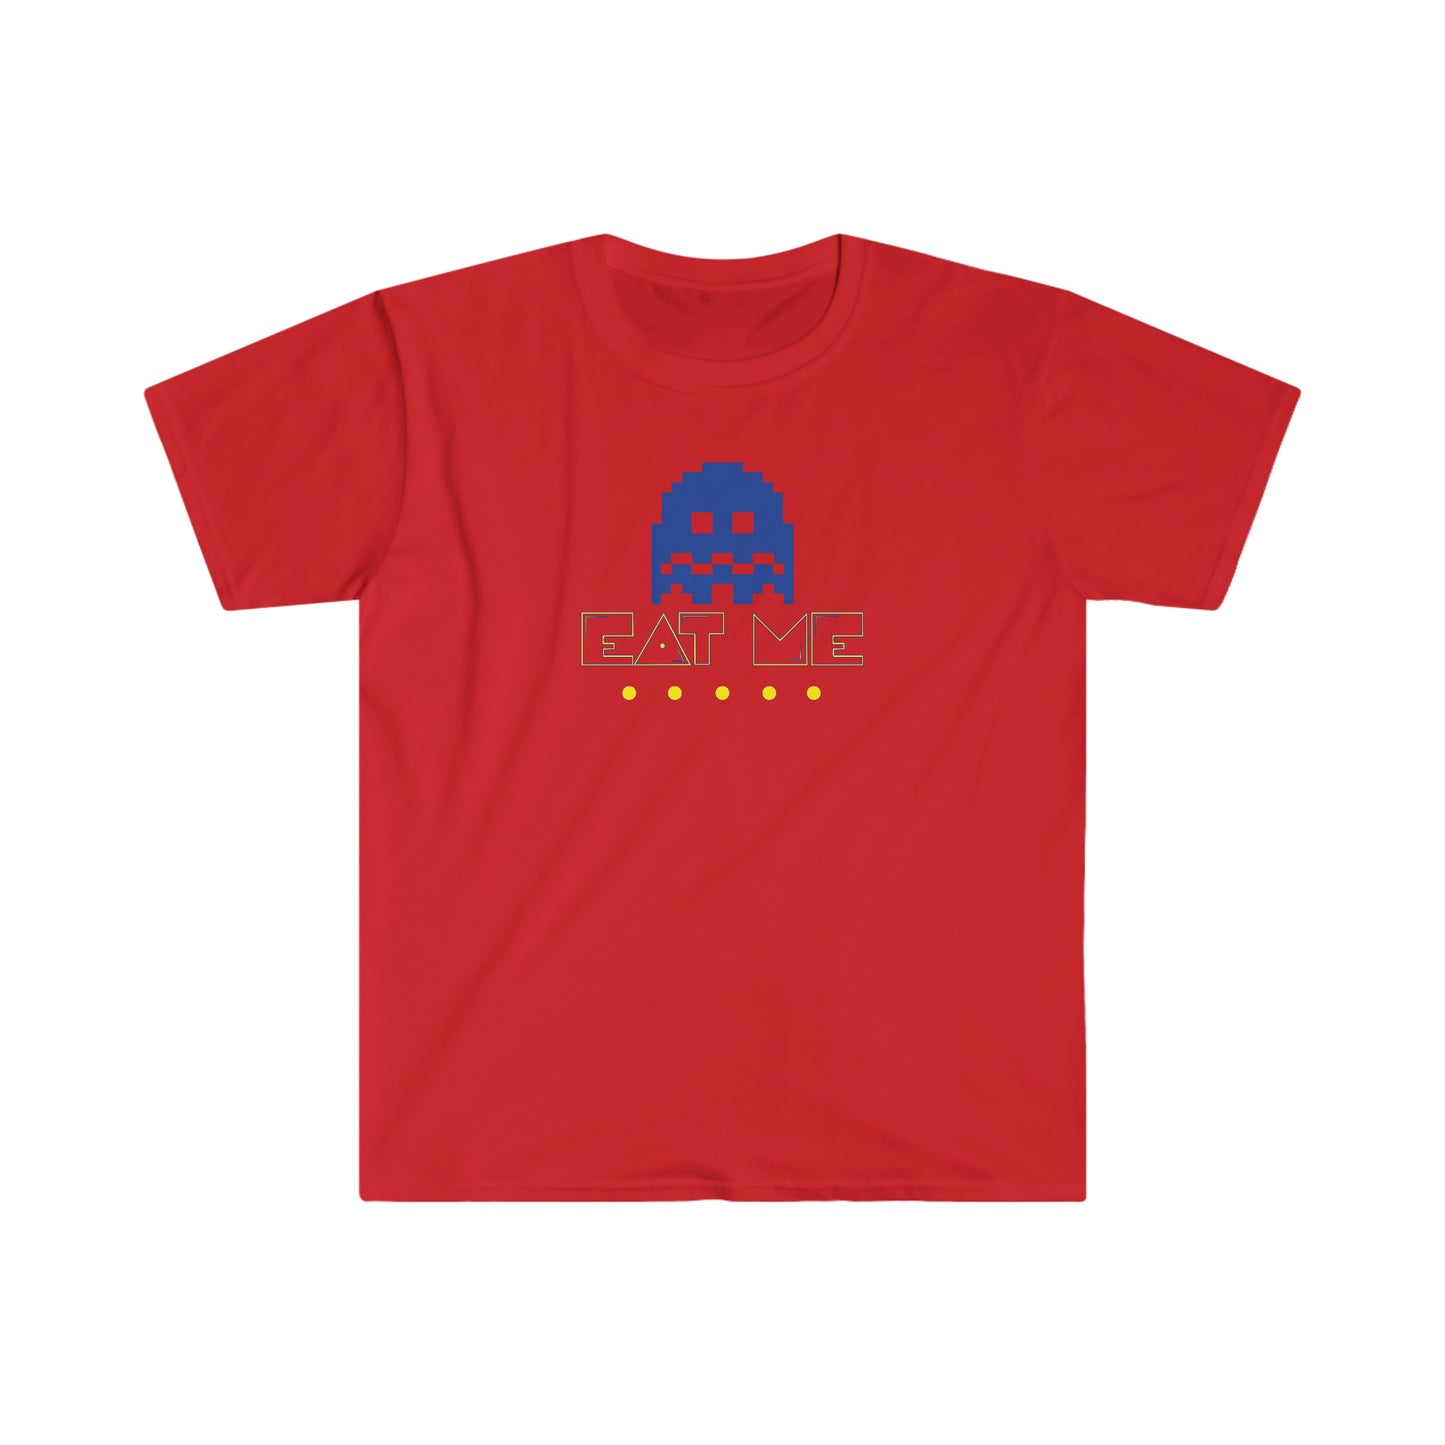 Pac-Man "Eat Me" Softstyle T-Shirt